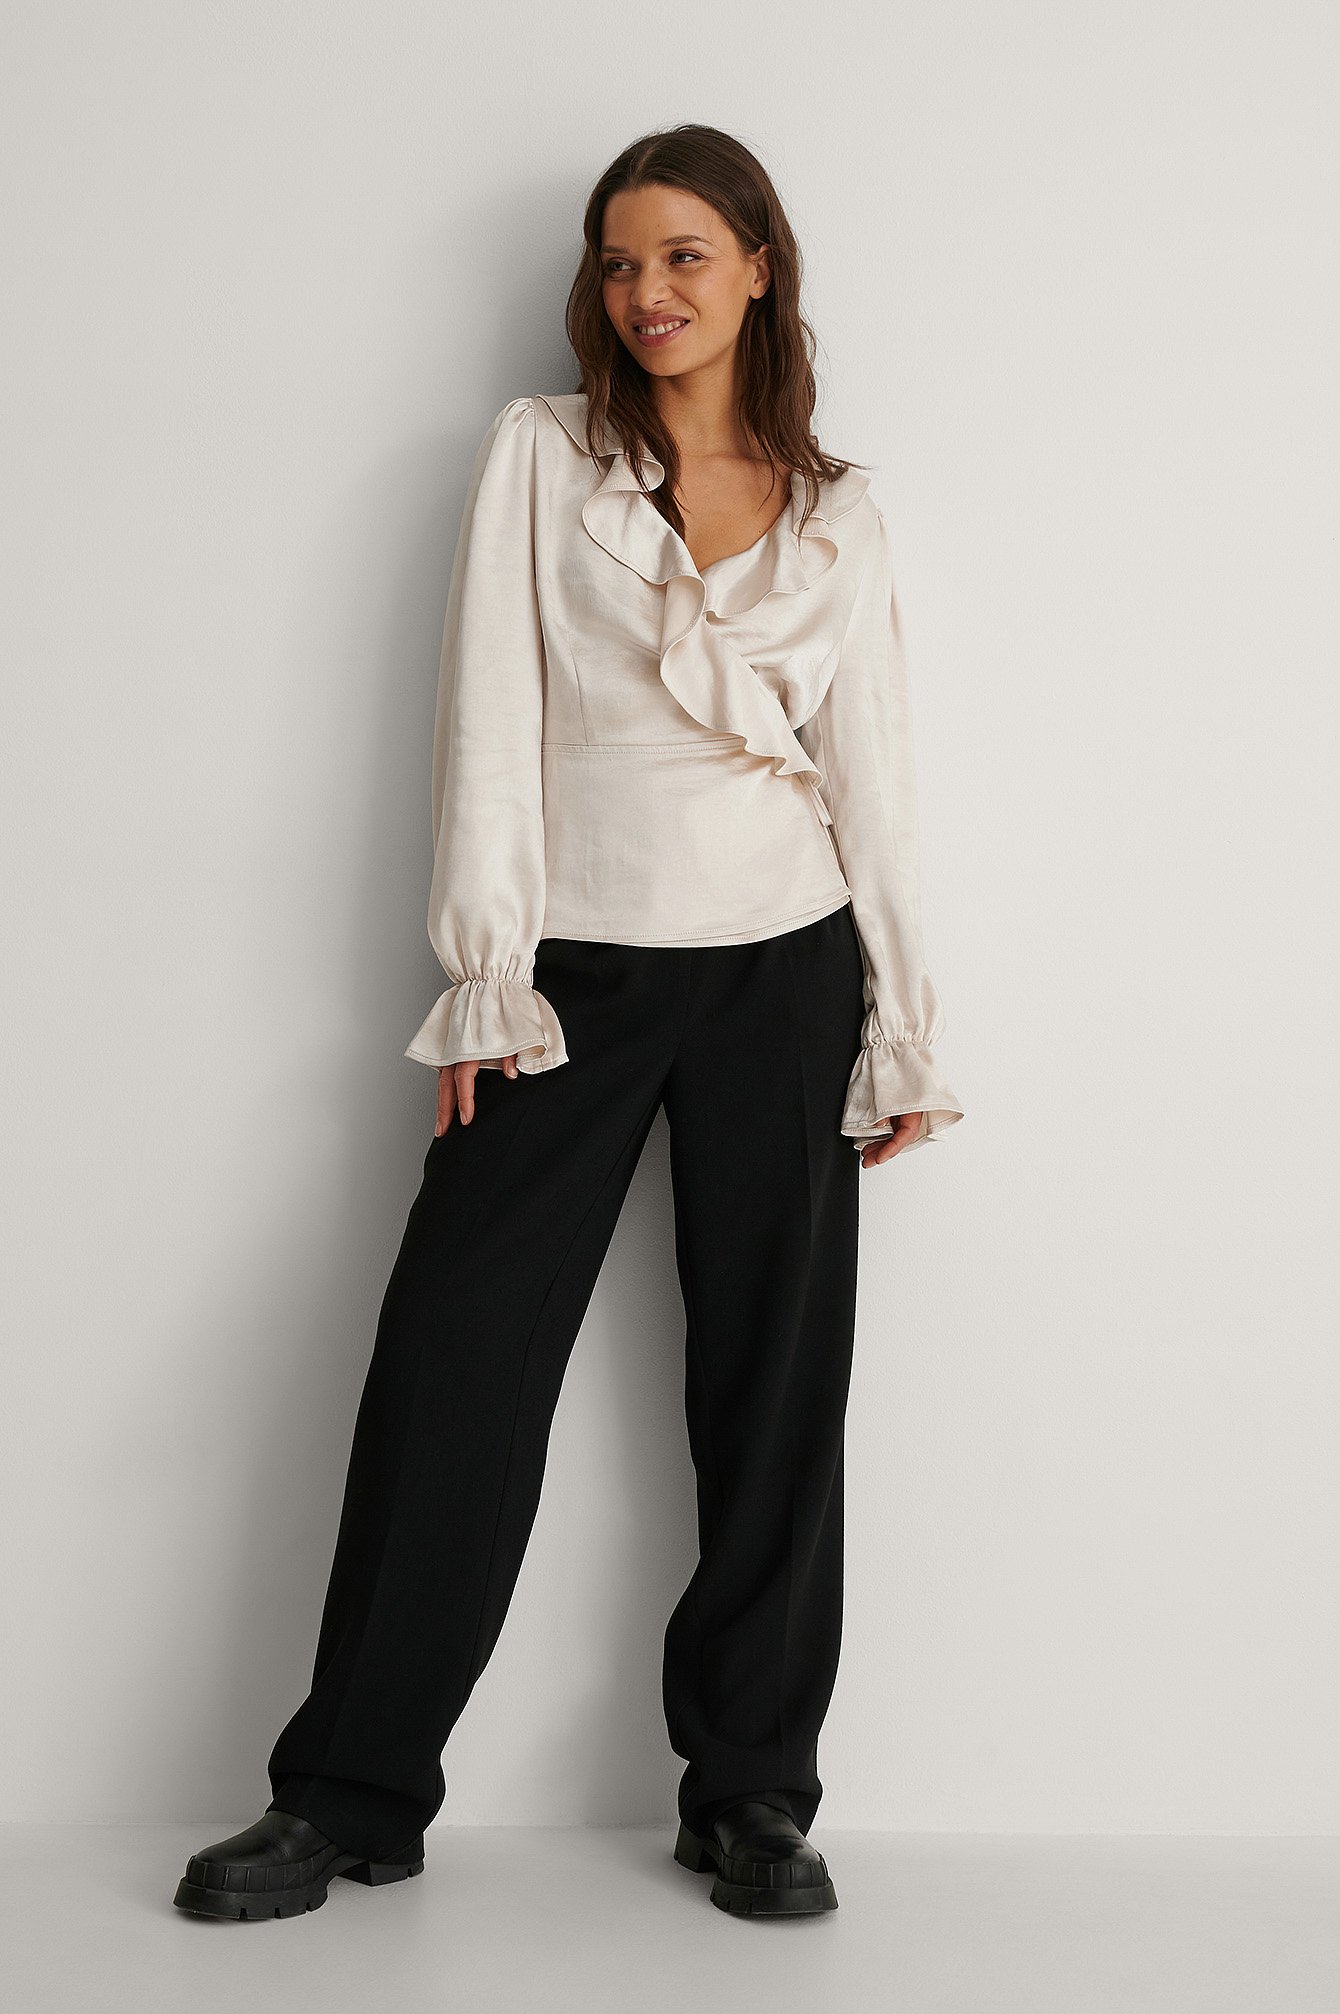 Frill Wrap Satin Blouse Outfit.